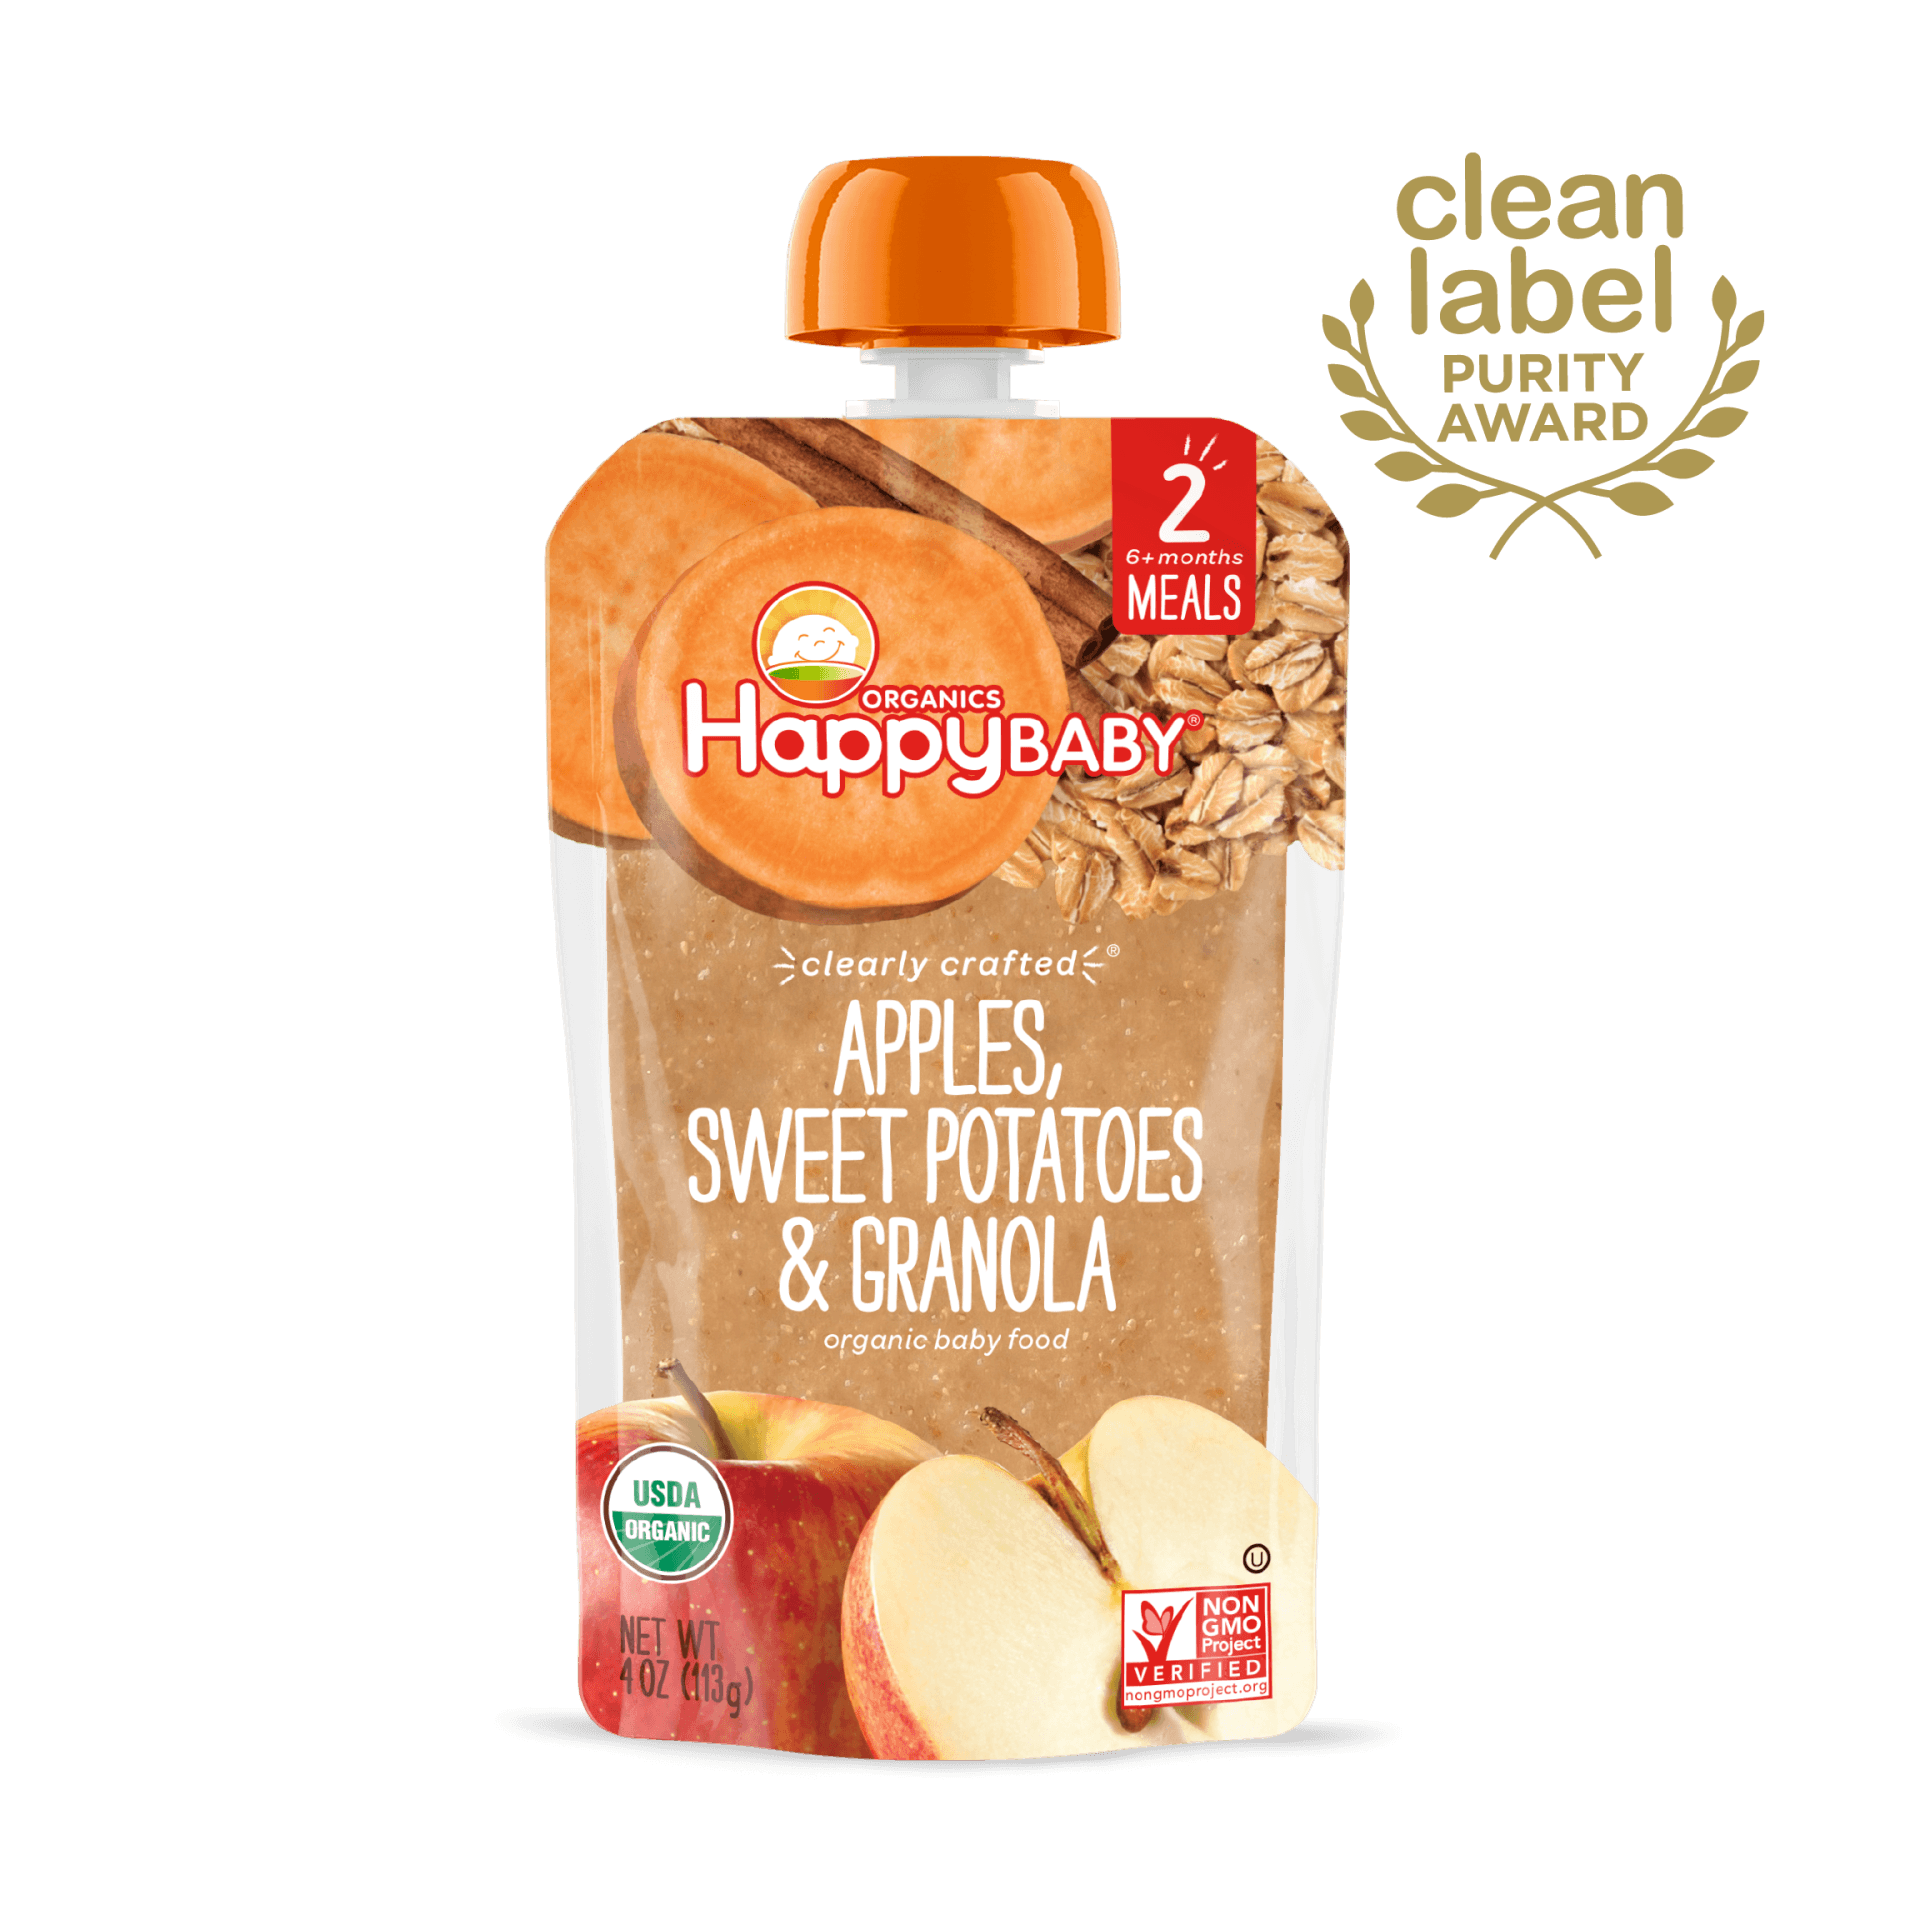 Happy Baby S2 - Clearly Crafted Apples Sweet Potatoes & Granola 4Oz pouch 16 units per case 4.0 oz